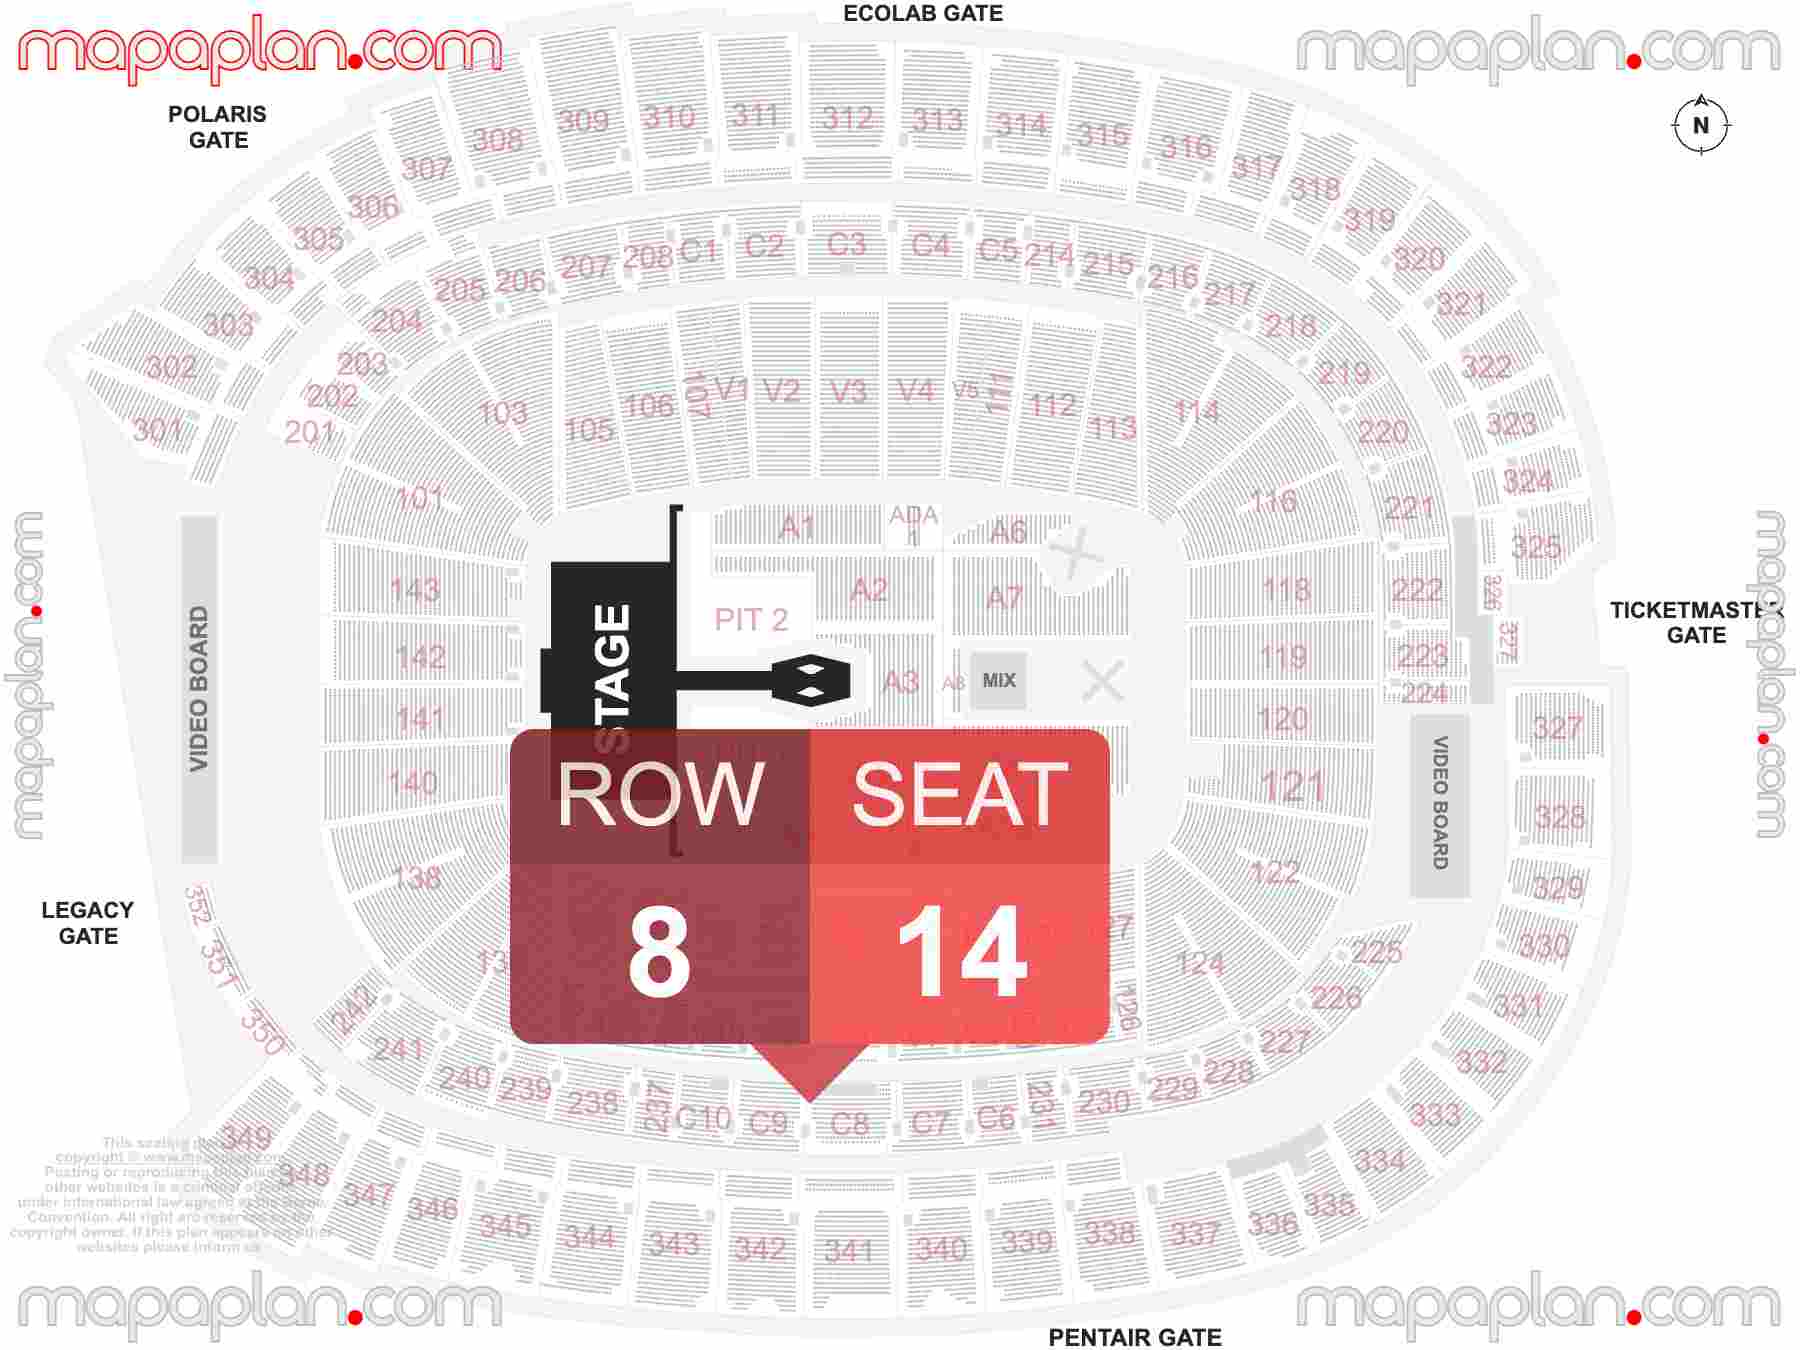 Minneapolis U.S. Bank Stadium seating chart Concert with extended catwalk runway B-stage inside capacity view arrangement plan - Interactive virtual 3d best seats & rows detailed stadium image configuration layout